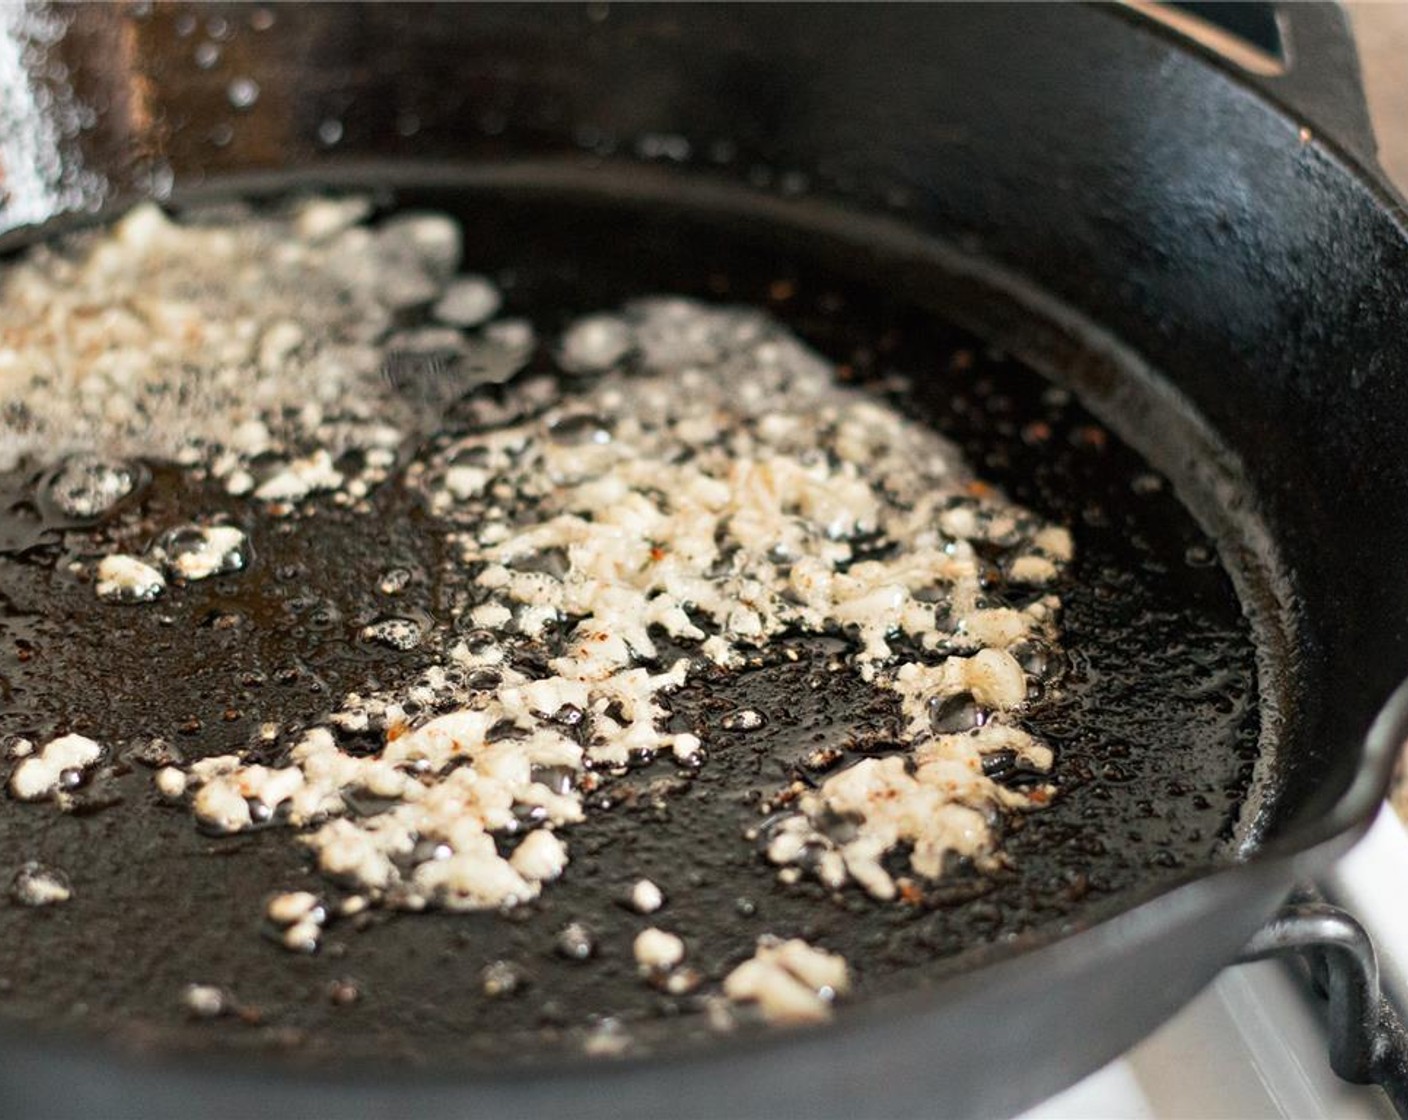 step 8 Reduce heat to medium-low. Add the garlic and saute until fragrant, about 30 seconds.